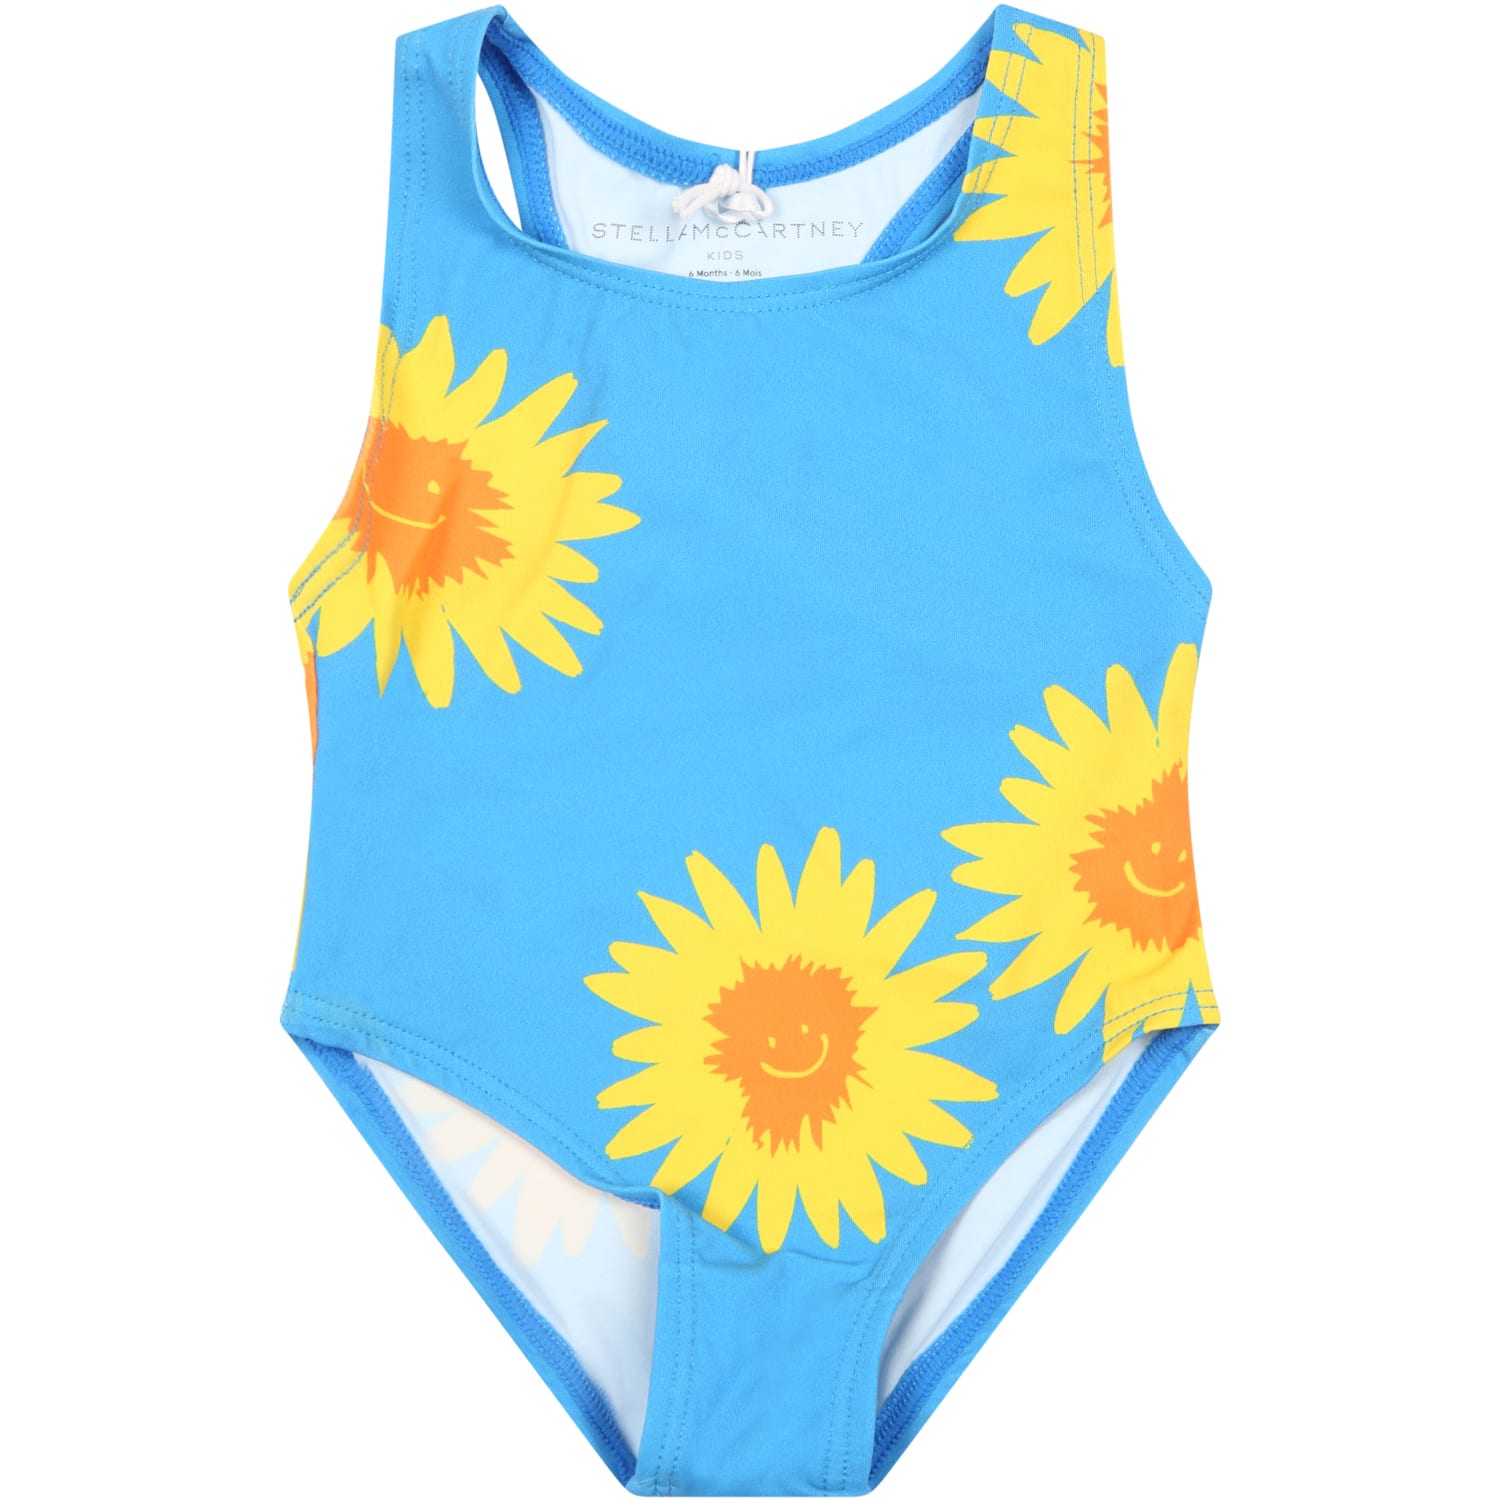 Stella McCartney Kids Azure Swimsuit For Baby Girl With Sunflowers